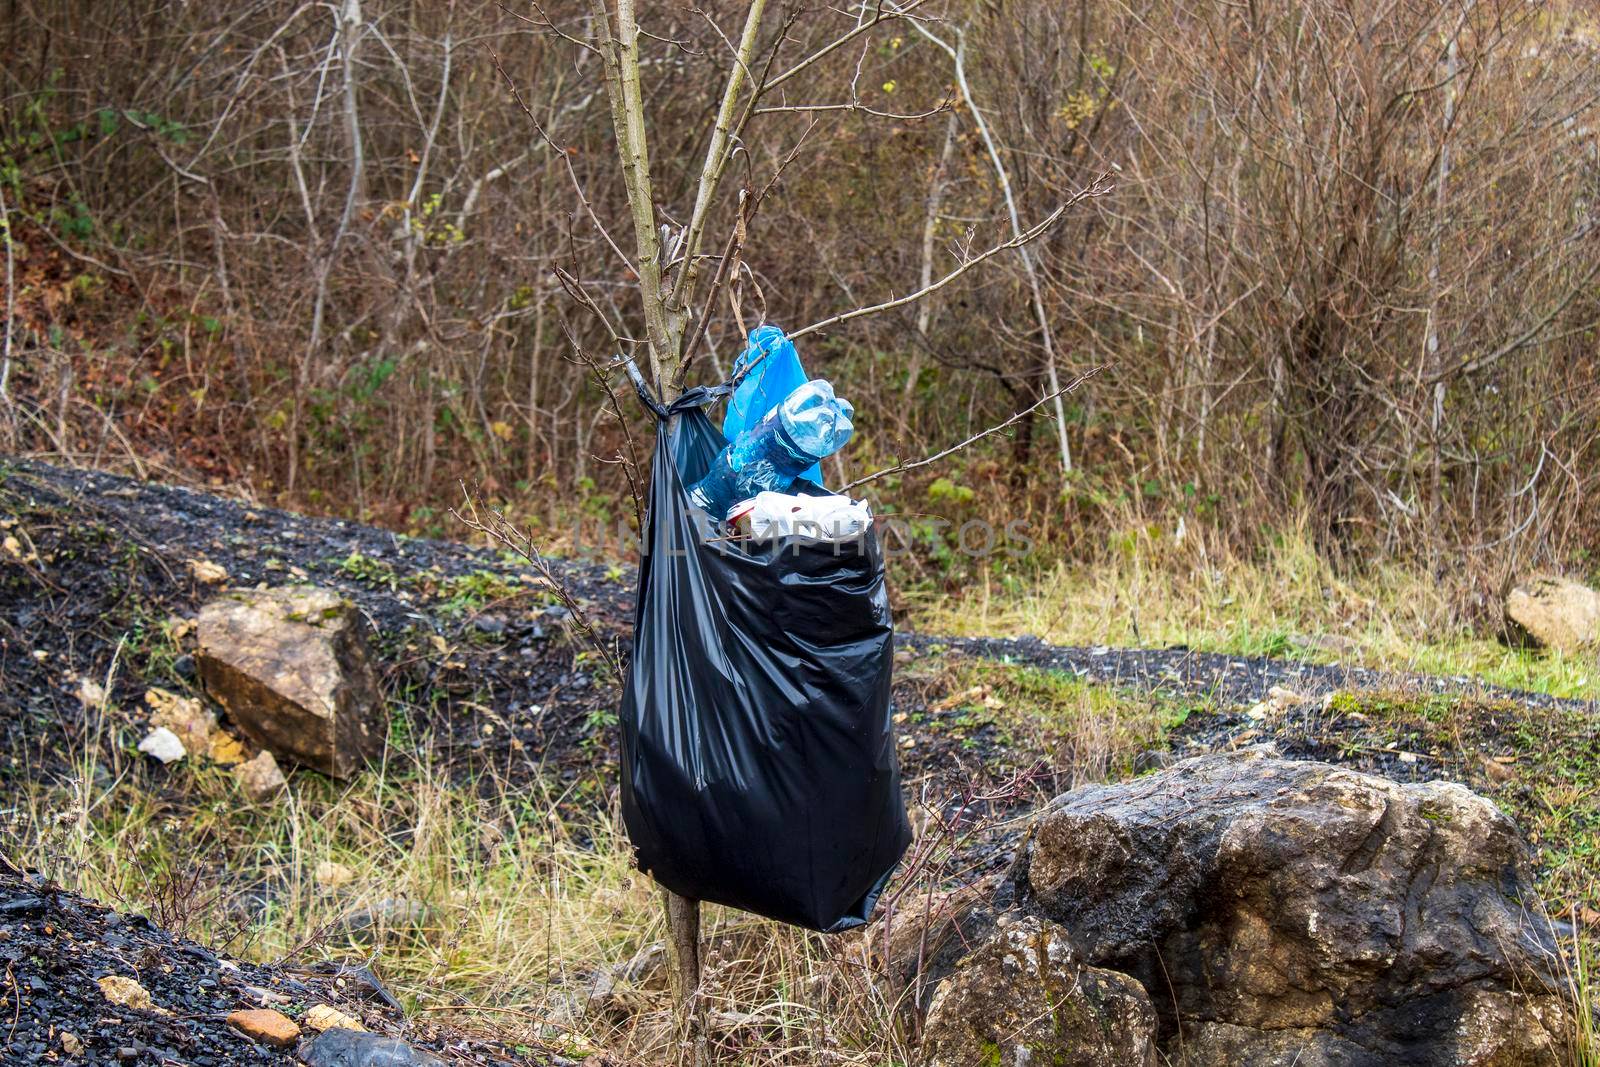 Plastic bottles in the trash in nature